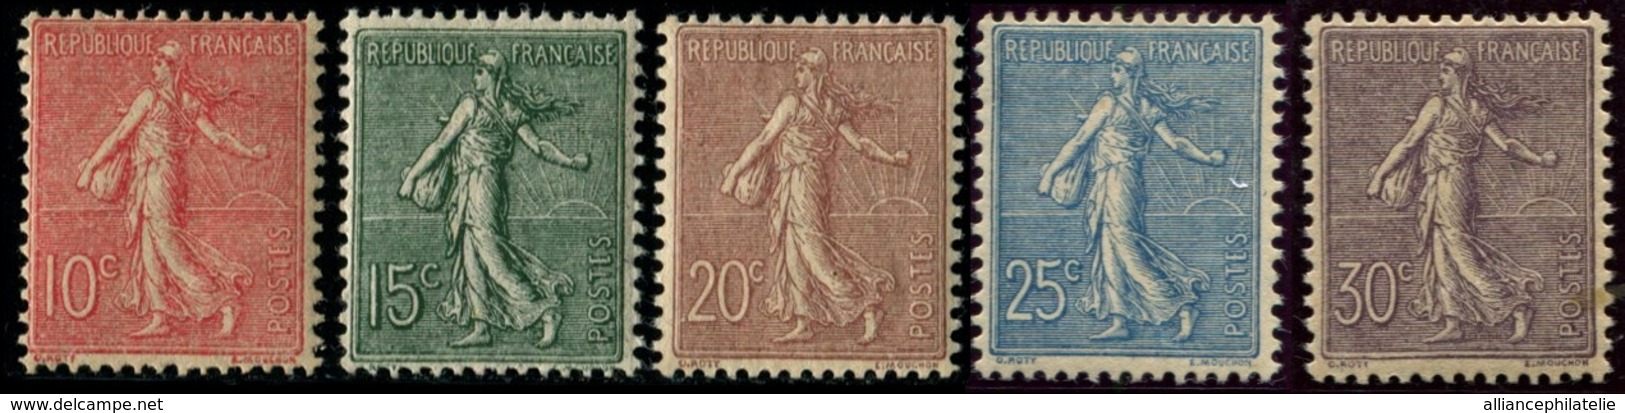 Lot N°7200 France Année Complète 1903 Neuf ** LUXE - ....-1939